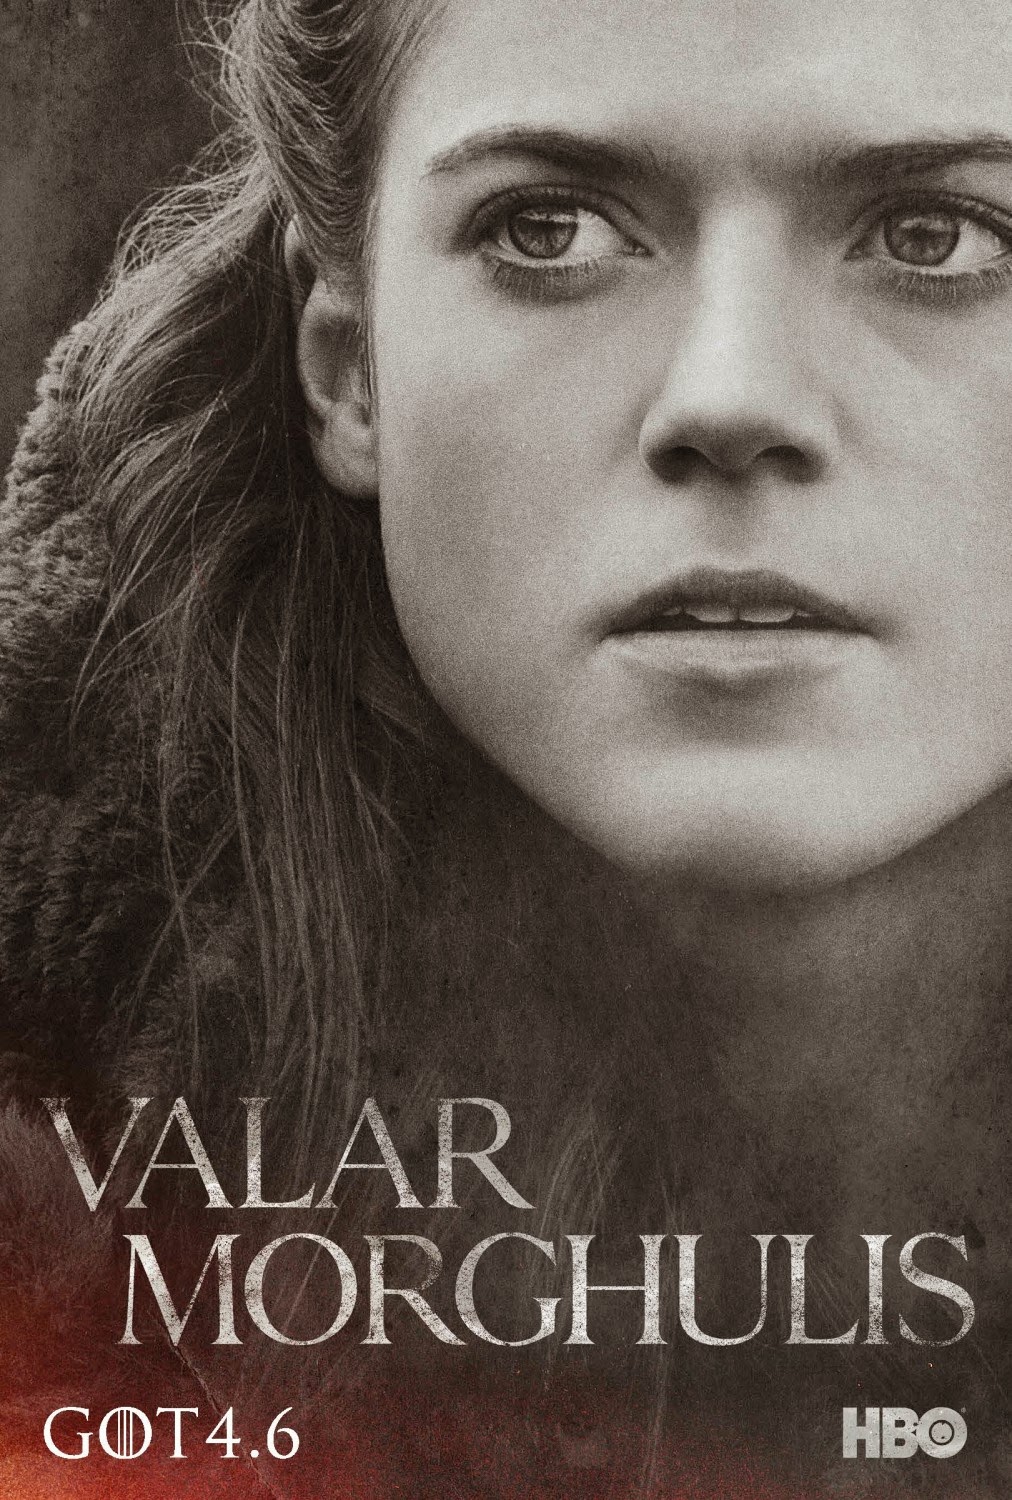 Game of Thrones Season 4 Valar Morghulis Teaser Character Television Poster Set - Rose Leslie as Ygritte